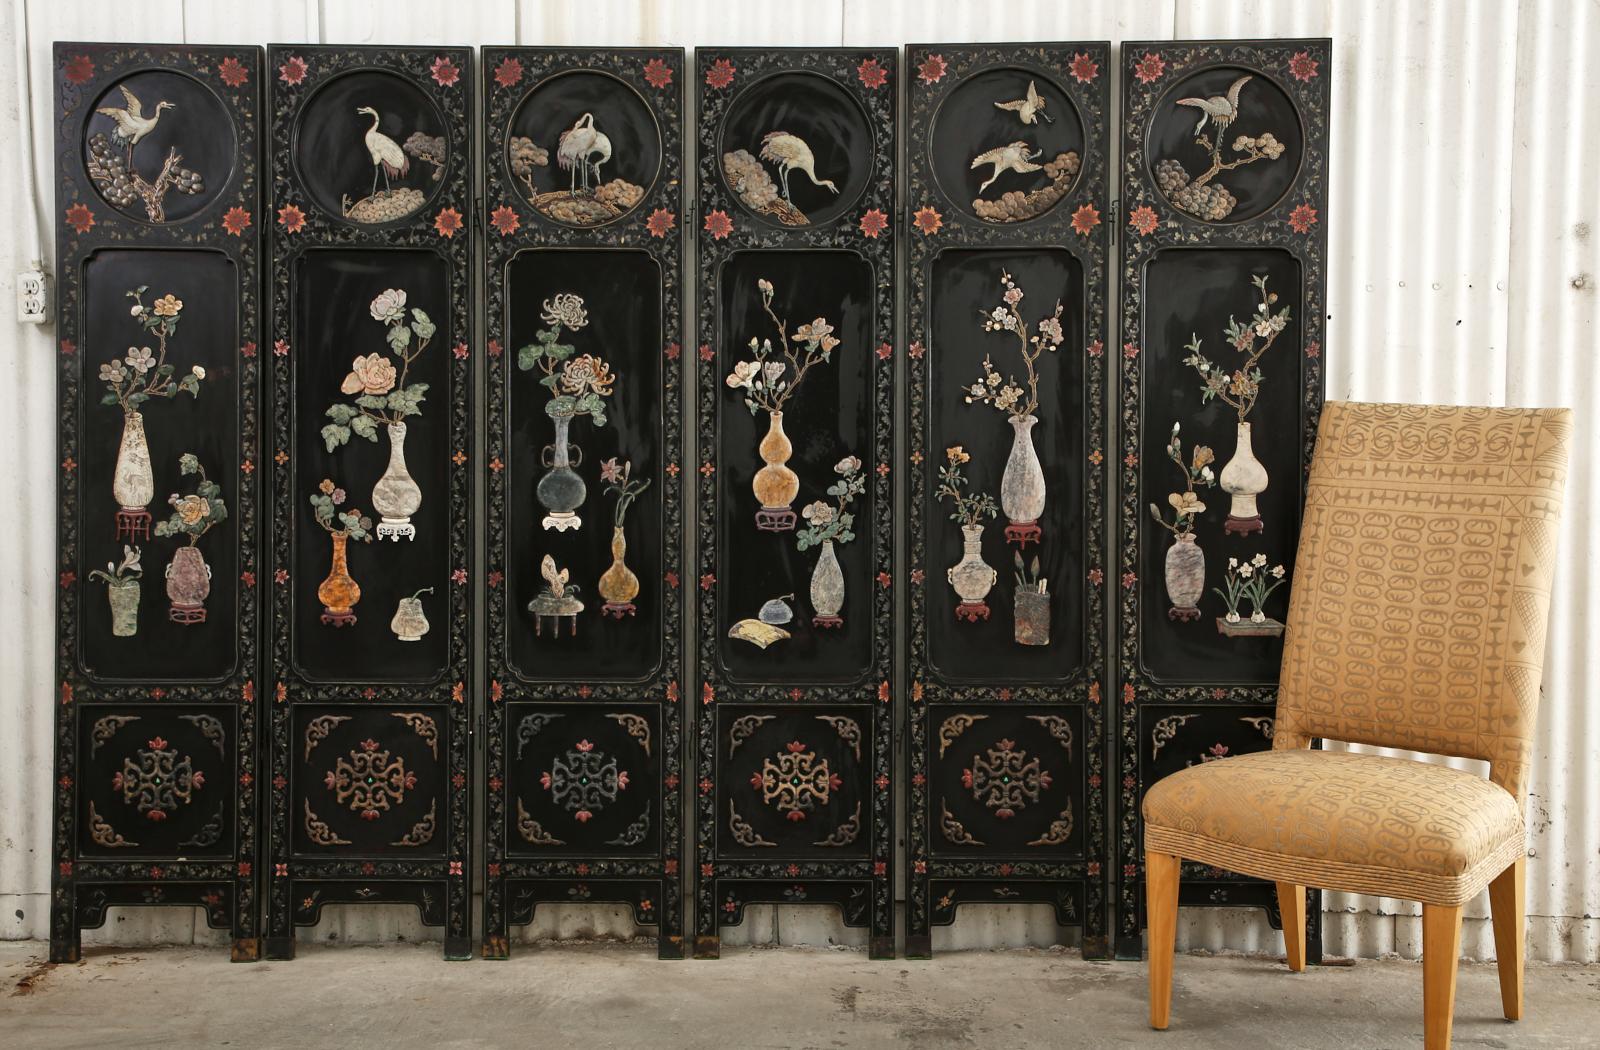 Exceptional Chinese export six-panel lacquered coromandel screen featuring intricately carved hardstone, soapstone, jade, lapis, quartz, and Shoushan stone from Northern Fujian. The panels are decorated with floral and vine scroll work around each